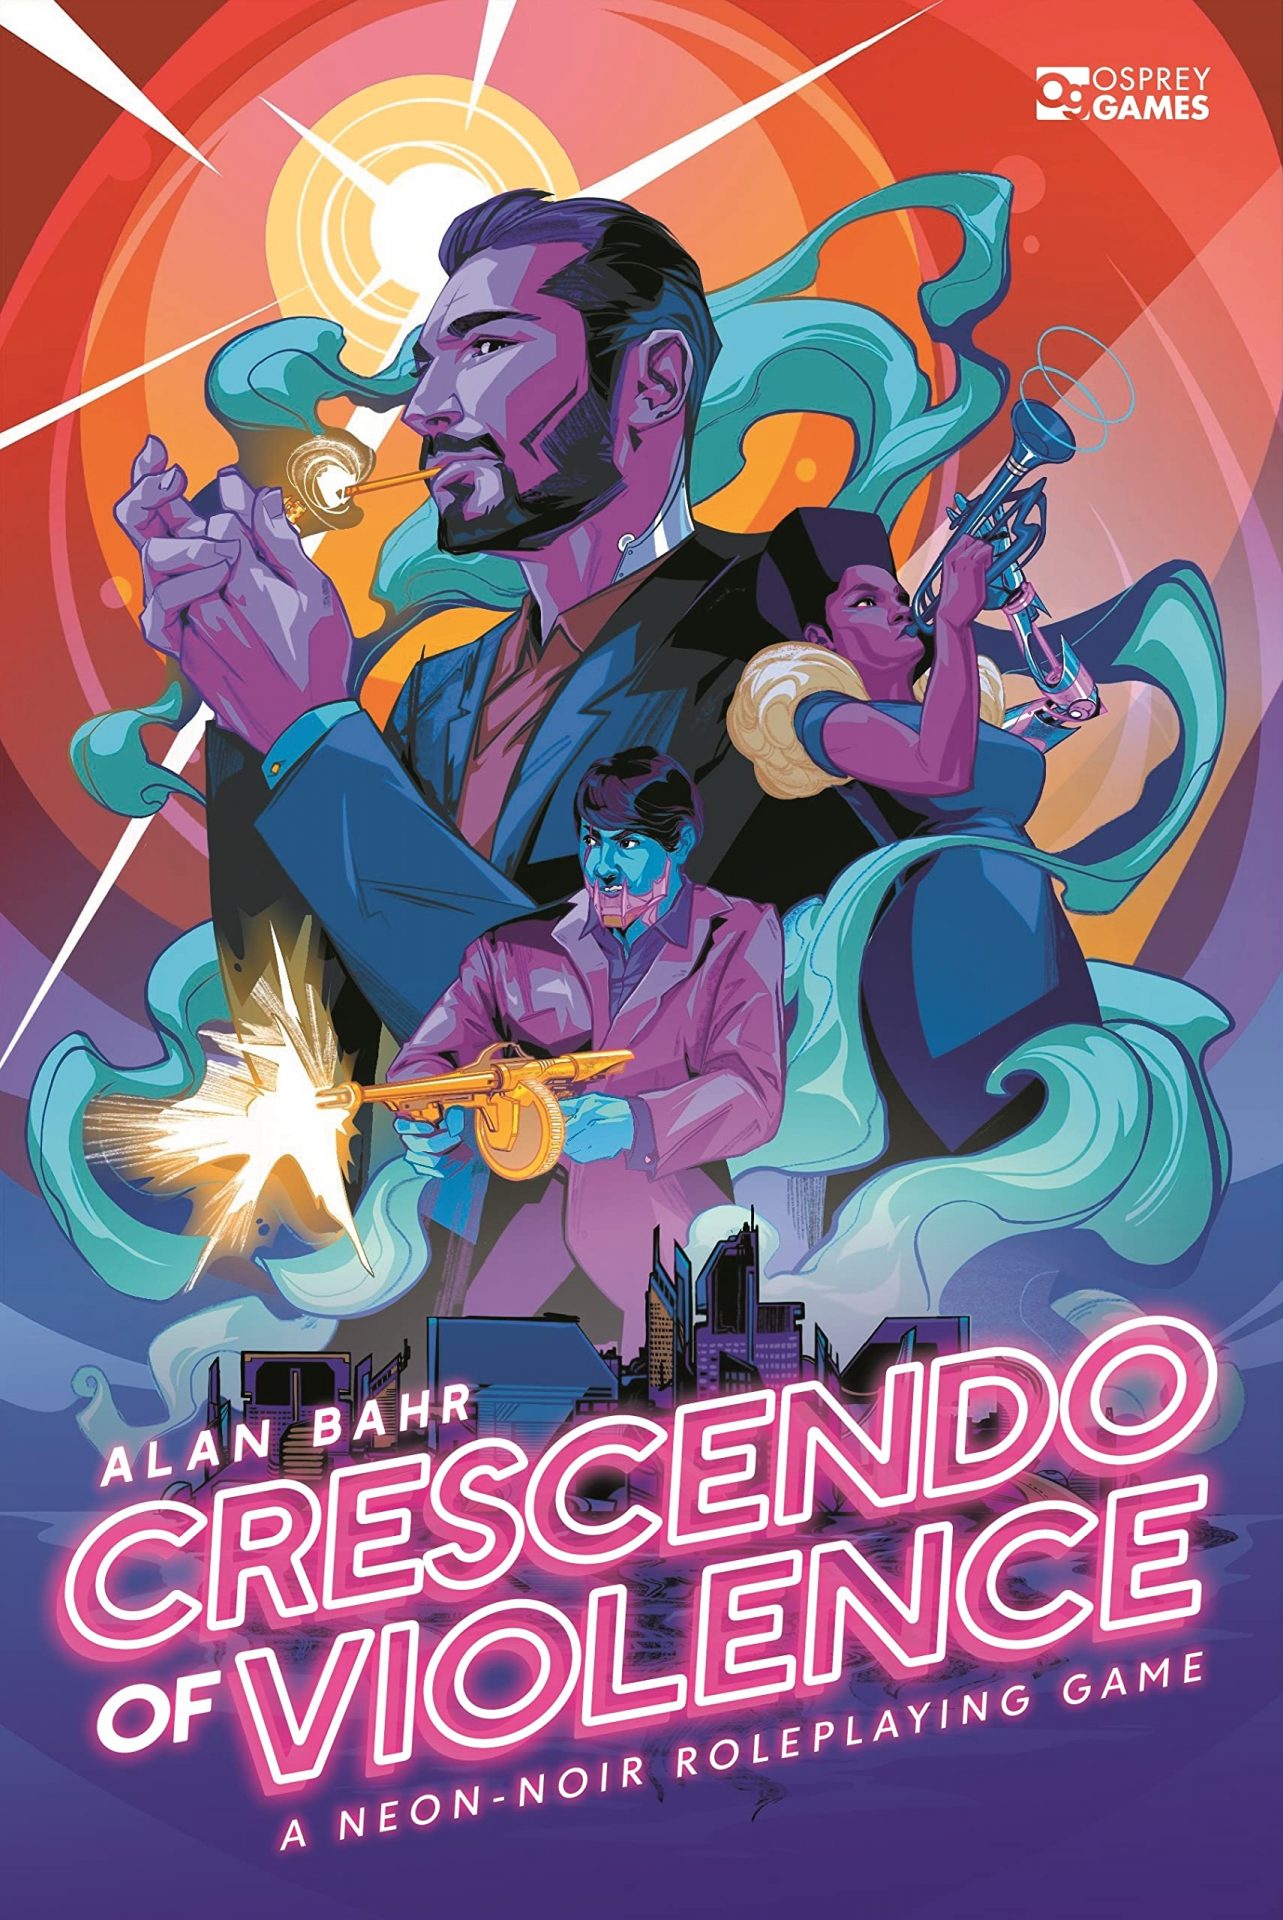 The cover of Crescendo of Violence shows a cast of characters in bright colors